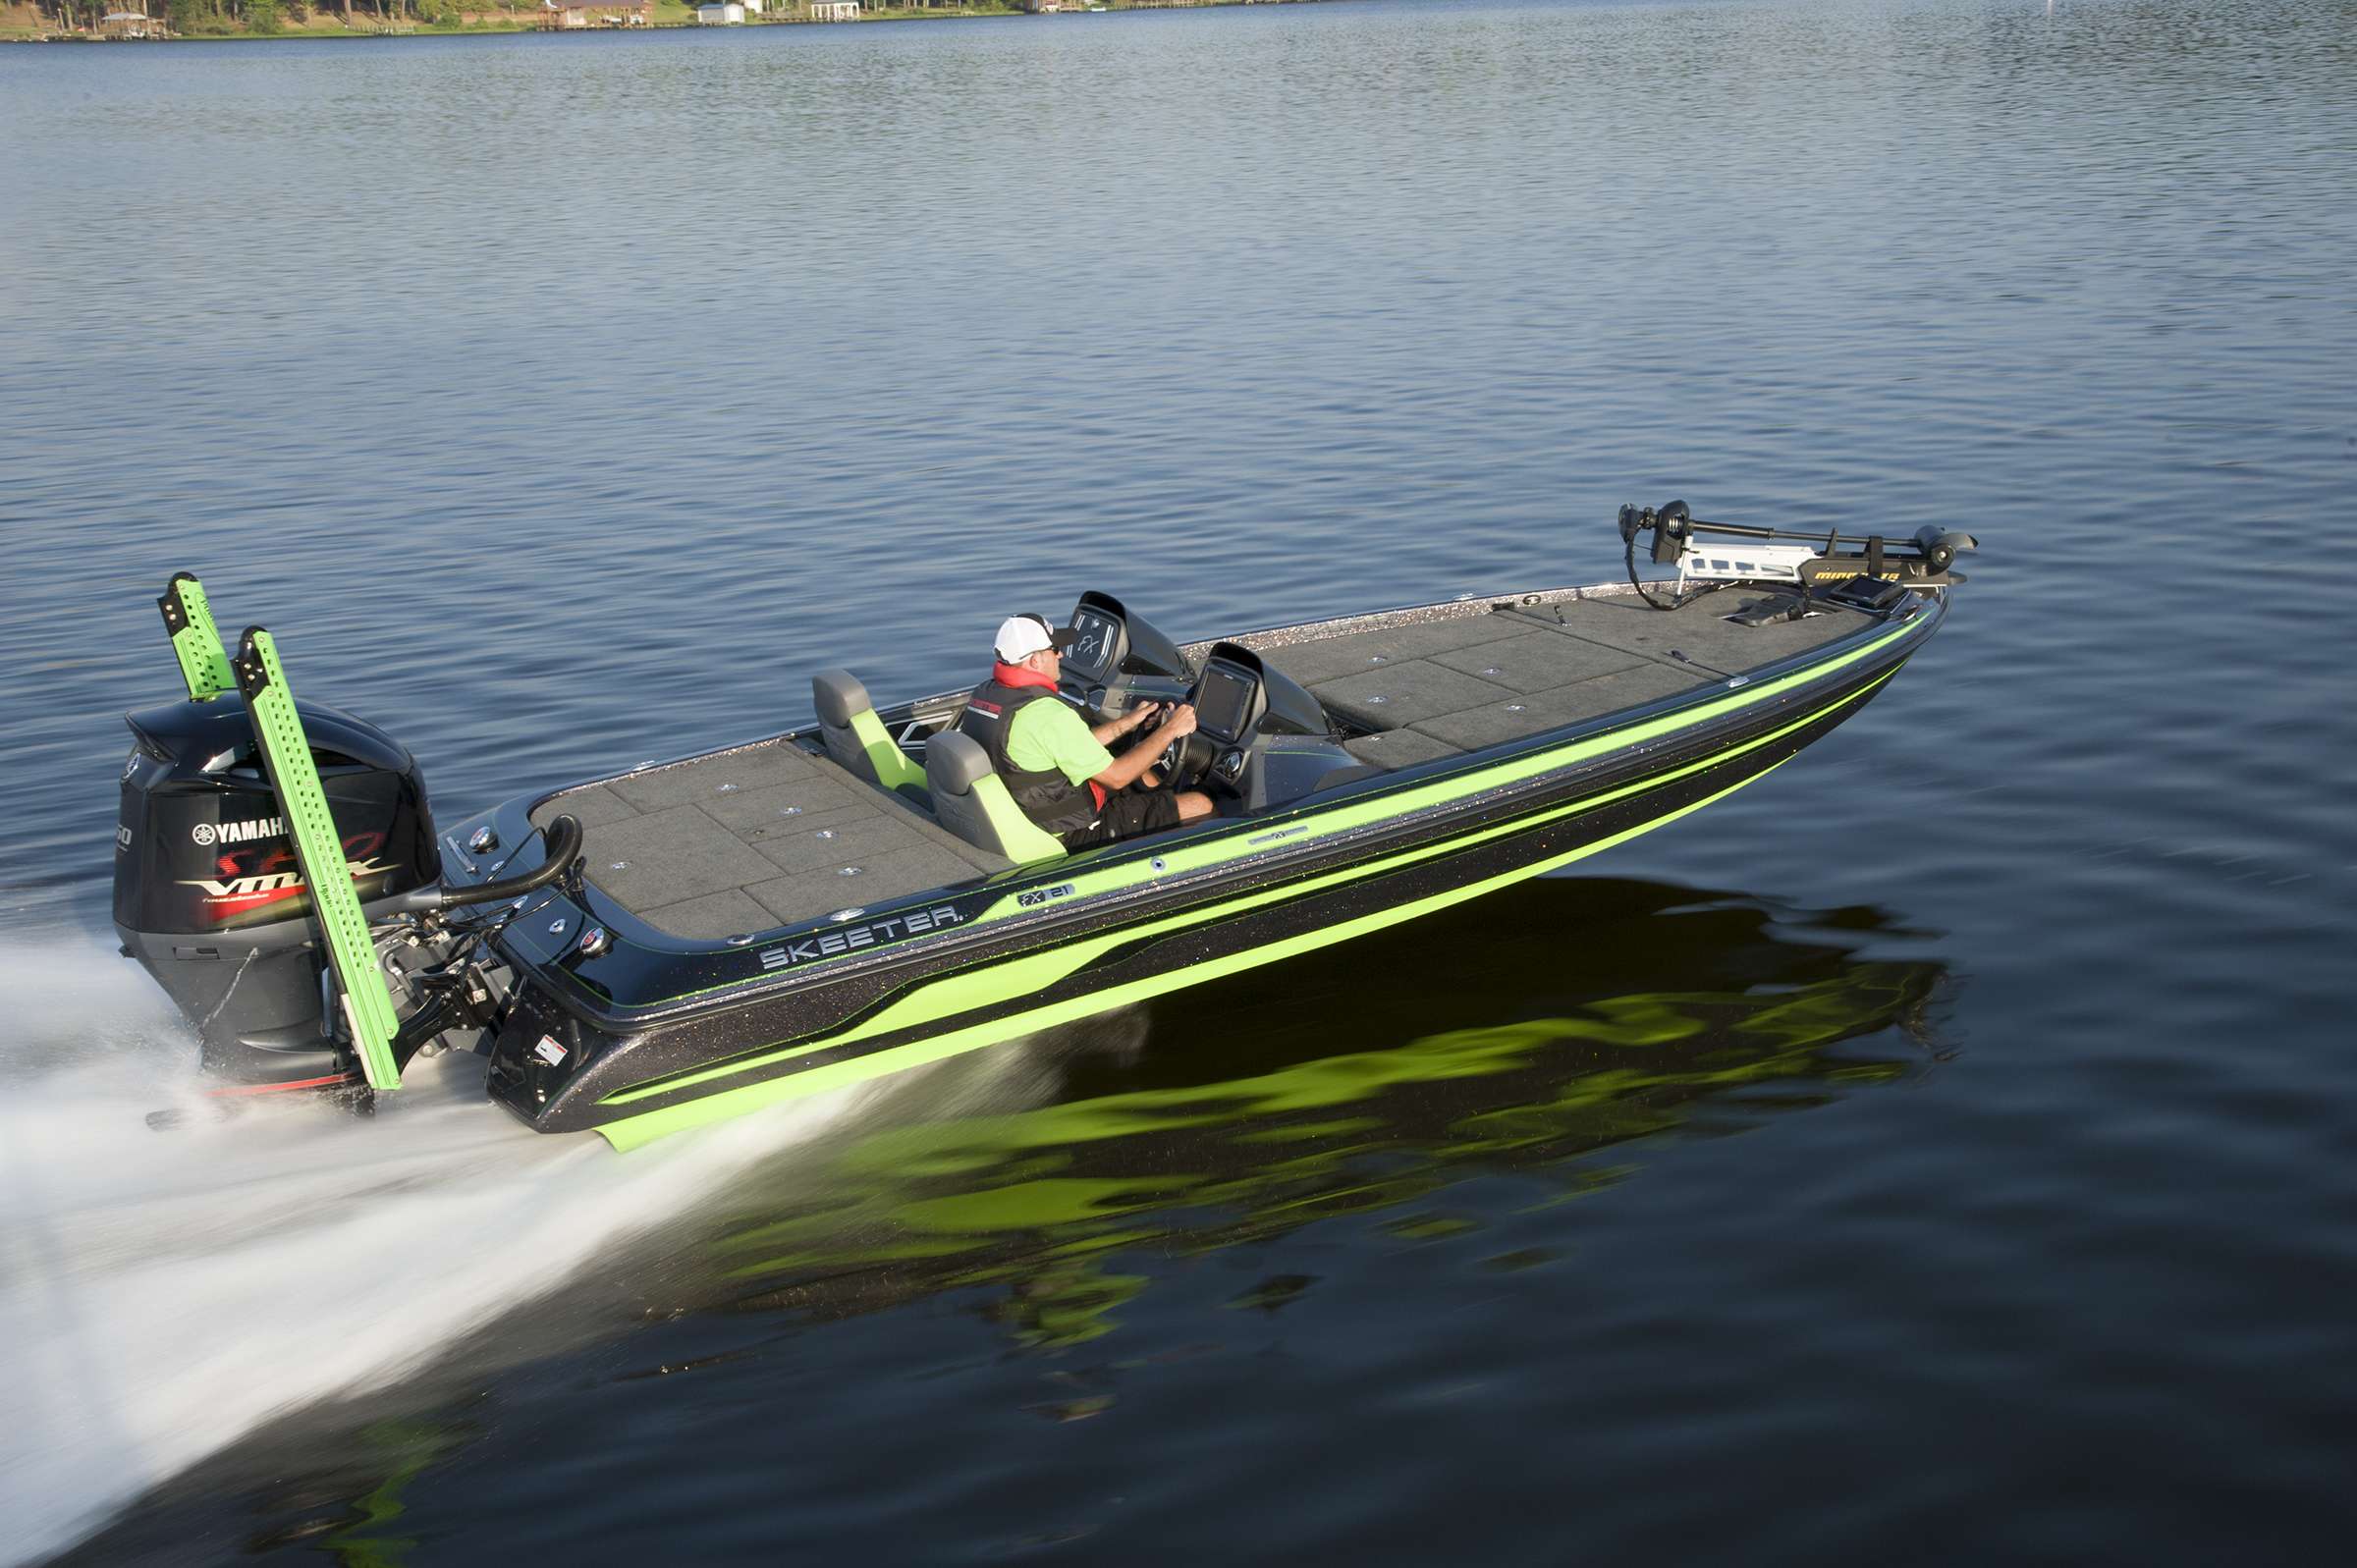 <b>Skeeter FXLE 20 & 21:</b> The Limited Edition FX21 and FX20 series boasts a brand new attitude with custom colors unique only to the limited edition line. These limited edition models come fully loaded with Lowrance HDS 12 Gen 3 electronics on dash and HDS 9 Gen 3 on bow, Two 8-foot Blade Power-Poles color matched to your boat, Minn Kota Fortrex 112 trolling motor and Rigid Industries deck lighting and storage lighting in all boxes. FXLE 21-$67,995, FXLE 20-$66,495; <a href=